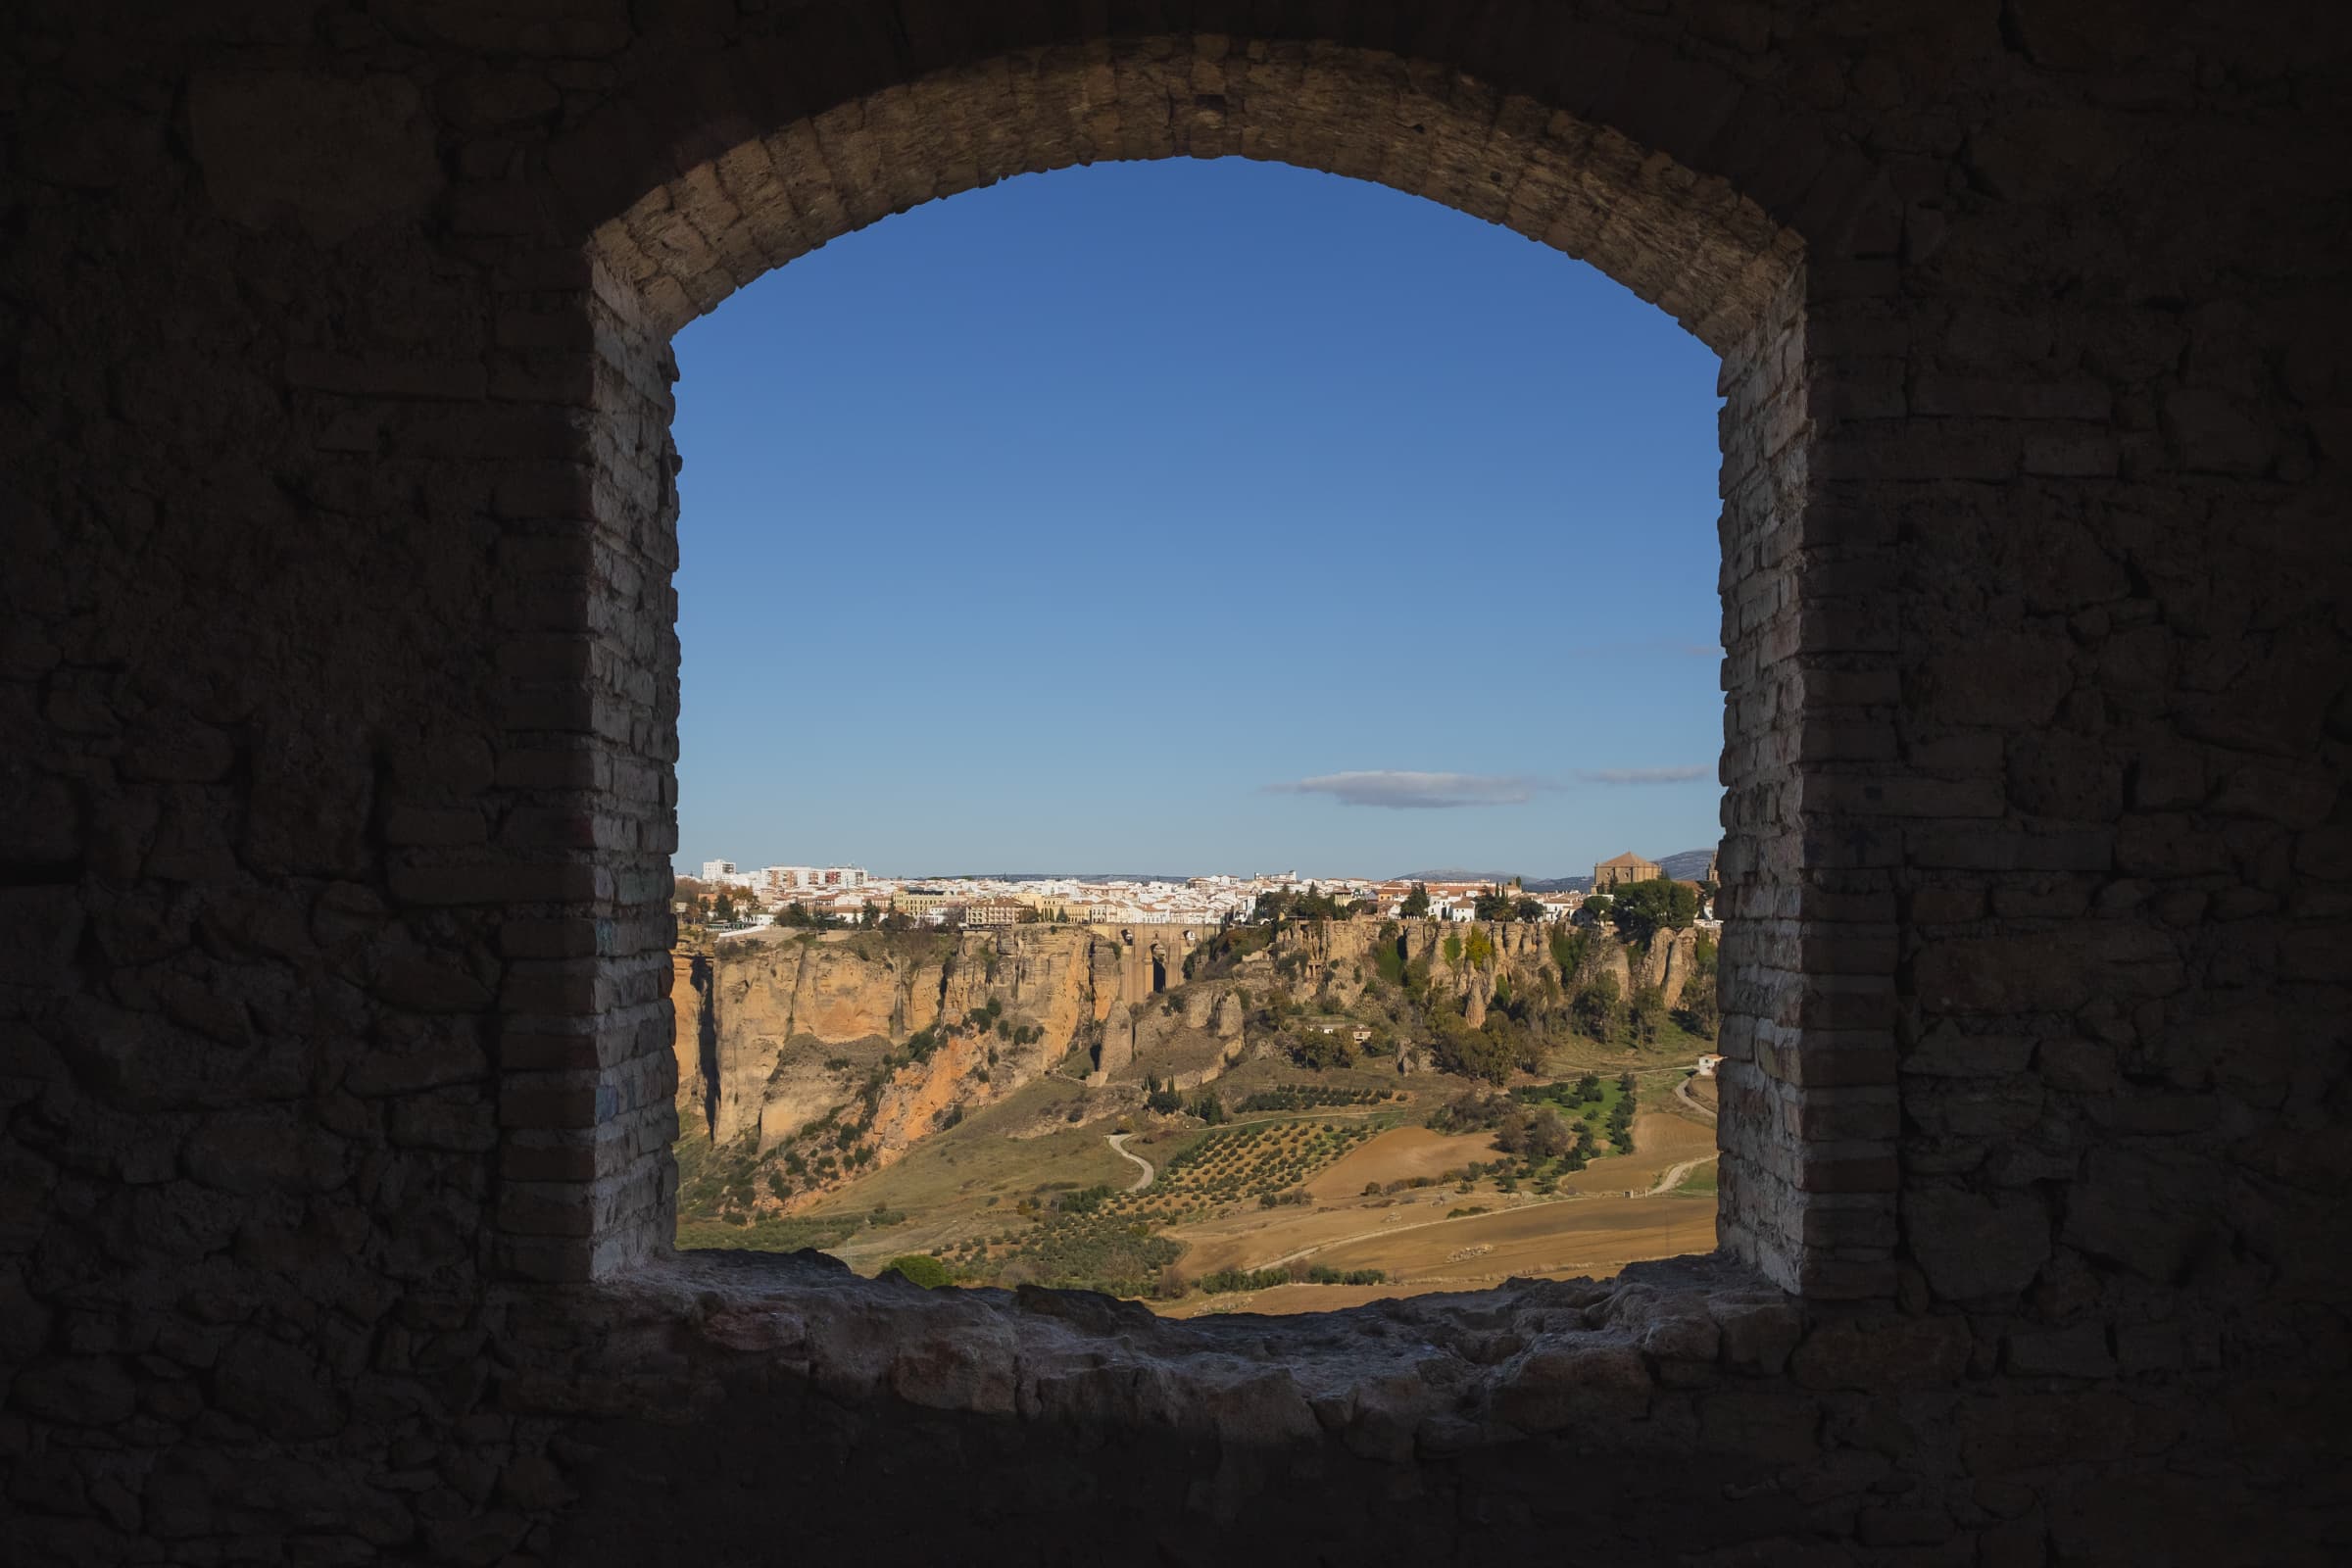 Ronda on a sunny day through the window of an abandoned building, across the valley, Spain